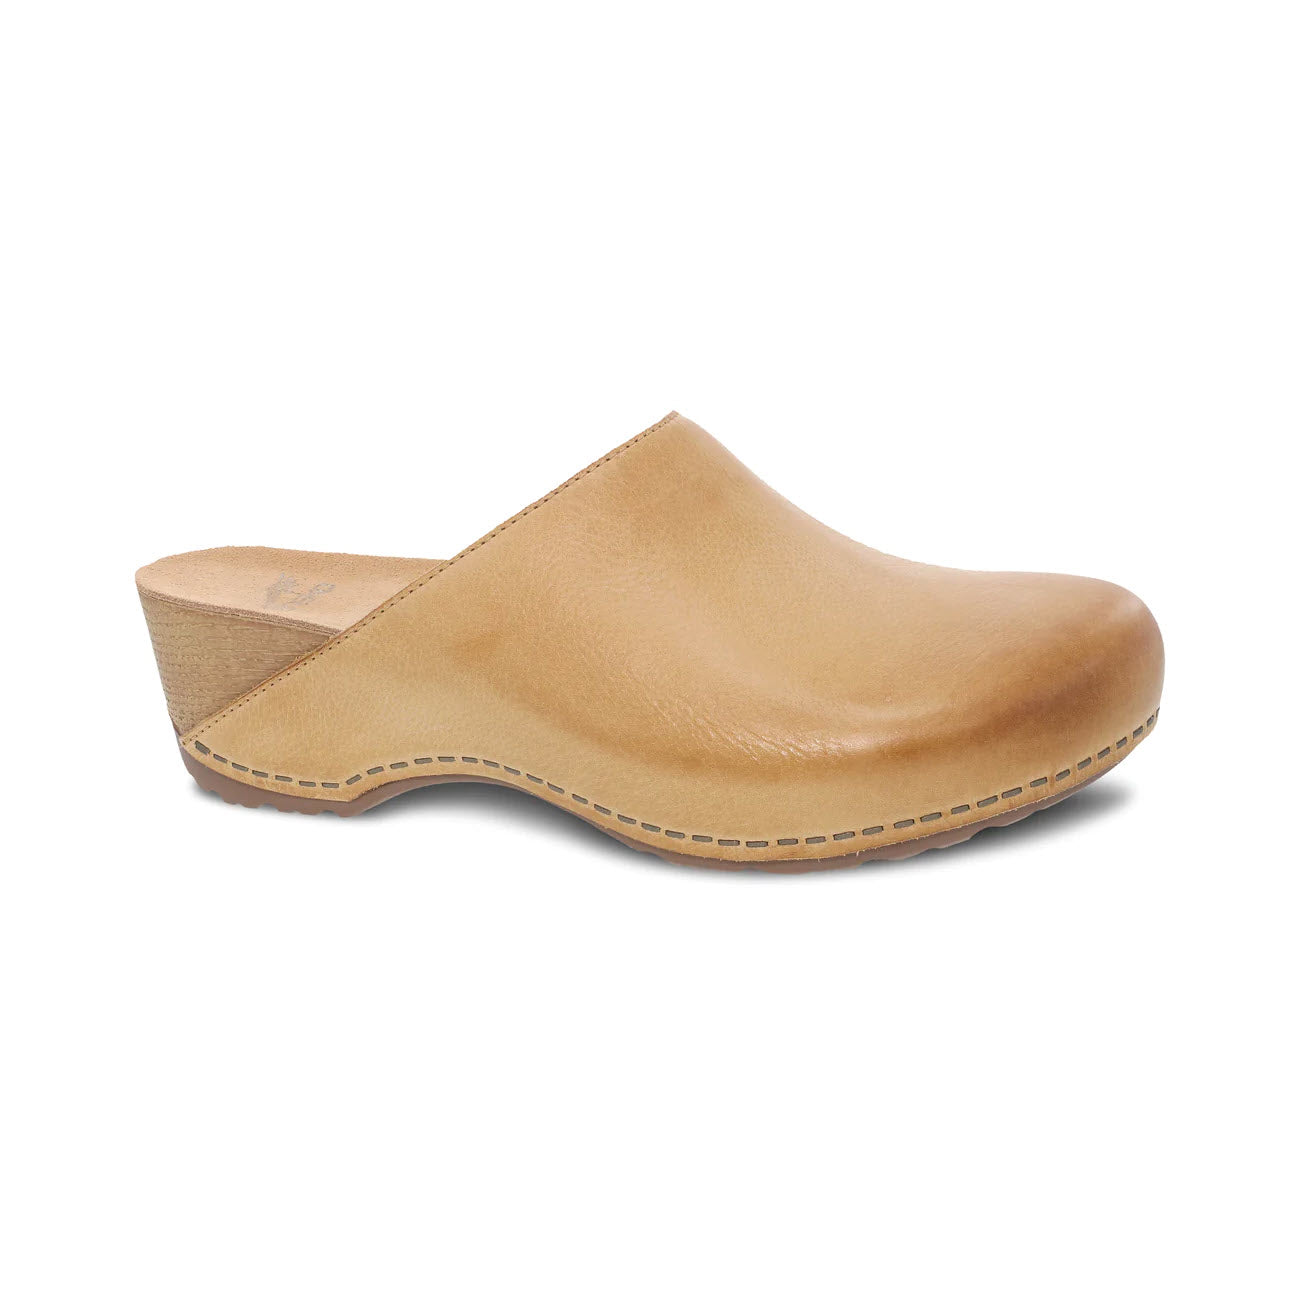 A single DANSKO Talulah tan leather mule with a wooden heel and visible stitching, isolated on a white background.